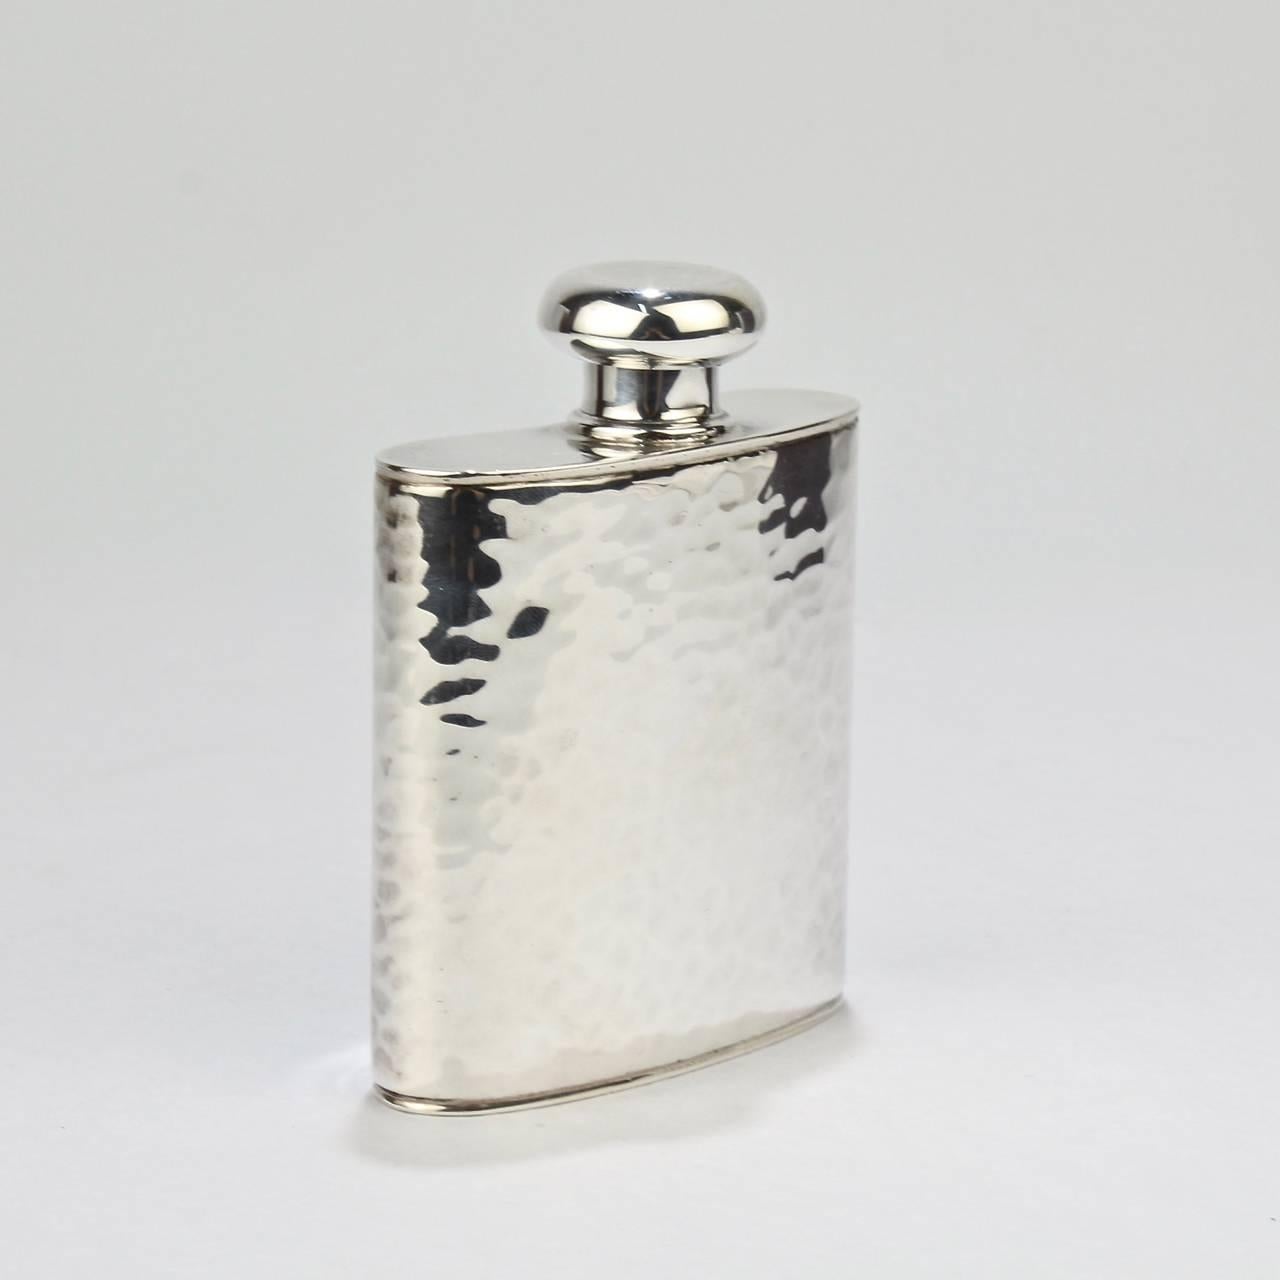 20th Century Hand-Hammered Sterling Silver Liquor or Whisky Hip Flask by Schroth